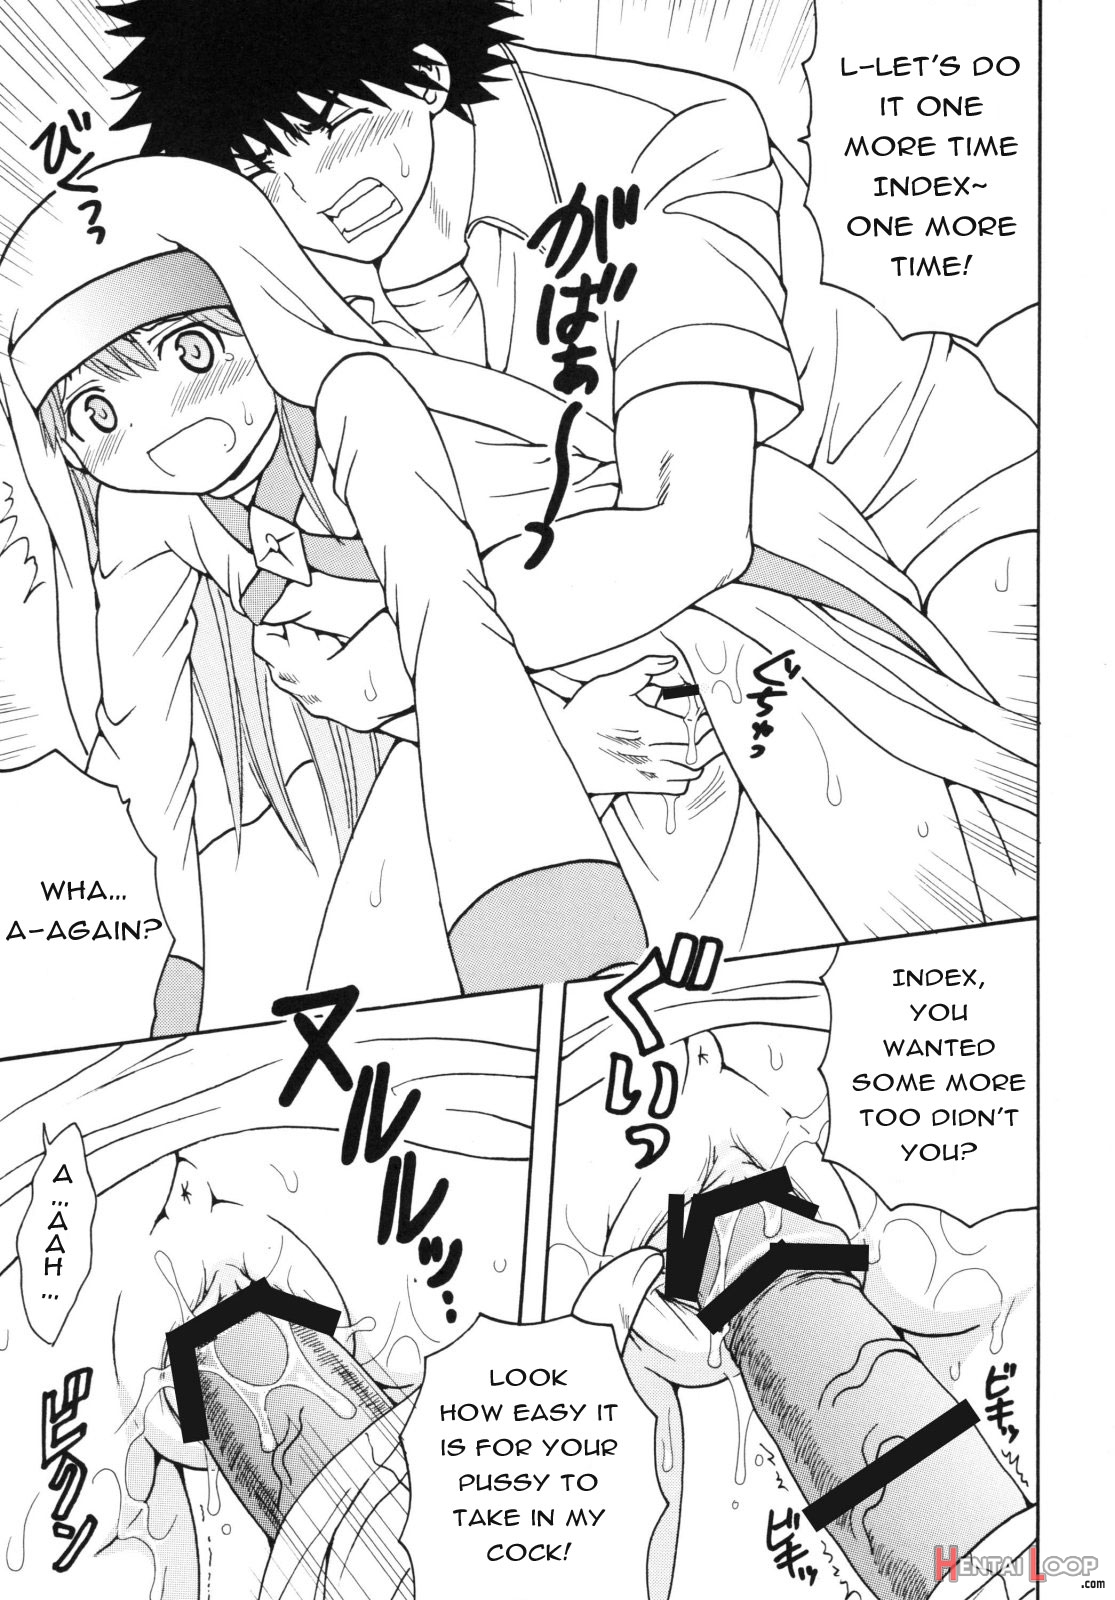 A Certain Magical Lewd Index #2 page 43